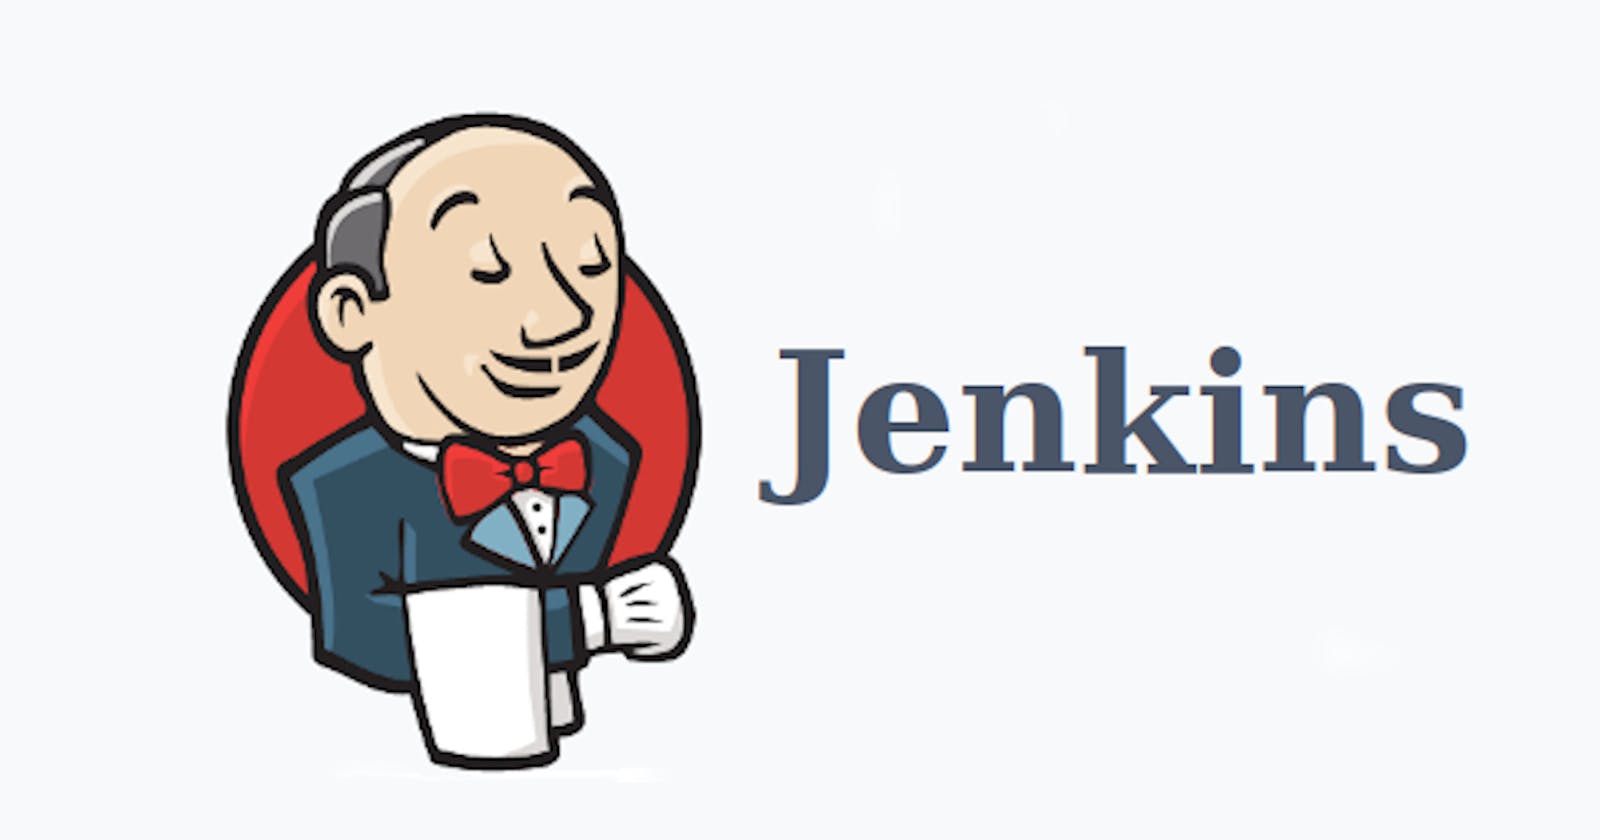 Day 24: Complete CI/CD Jenkins Project